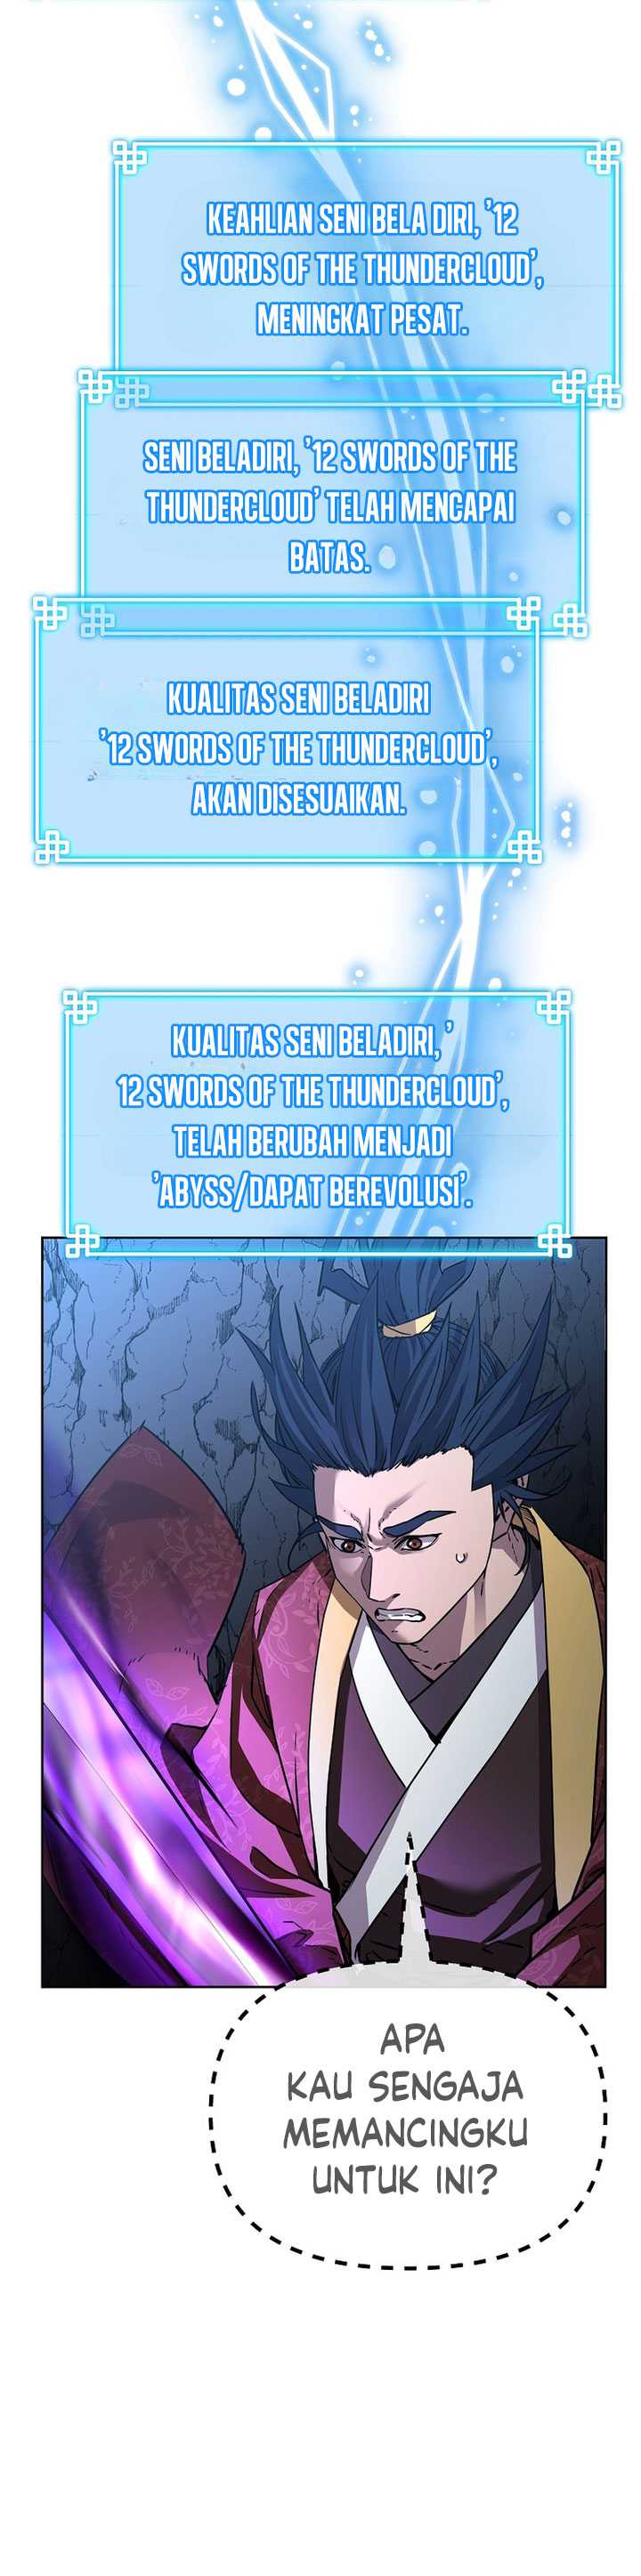 Reincarnation of the Murim Clan’s Former Ranker Chapter 117